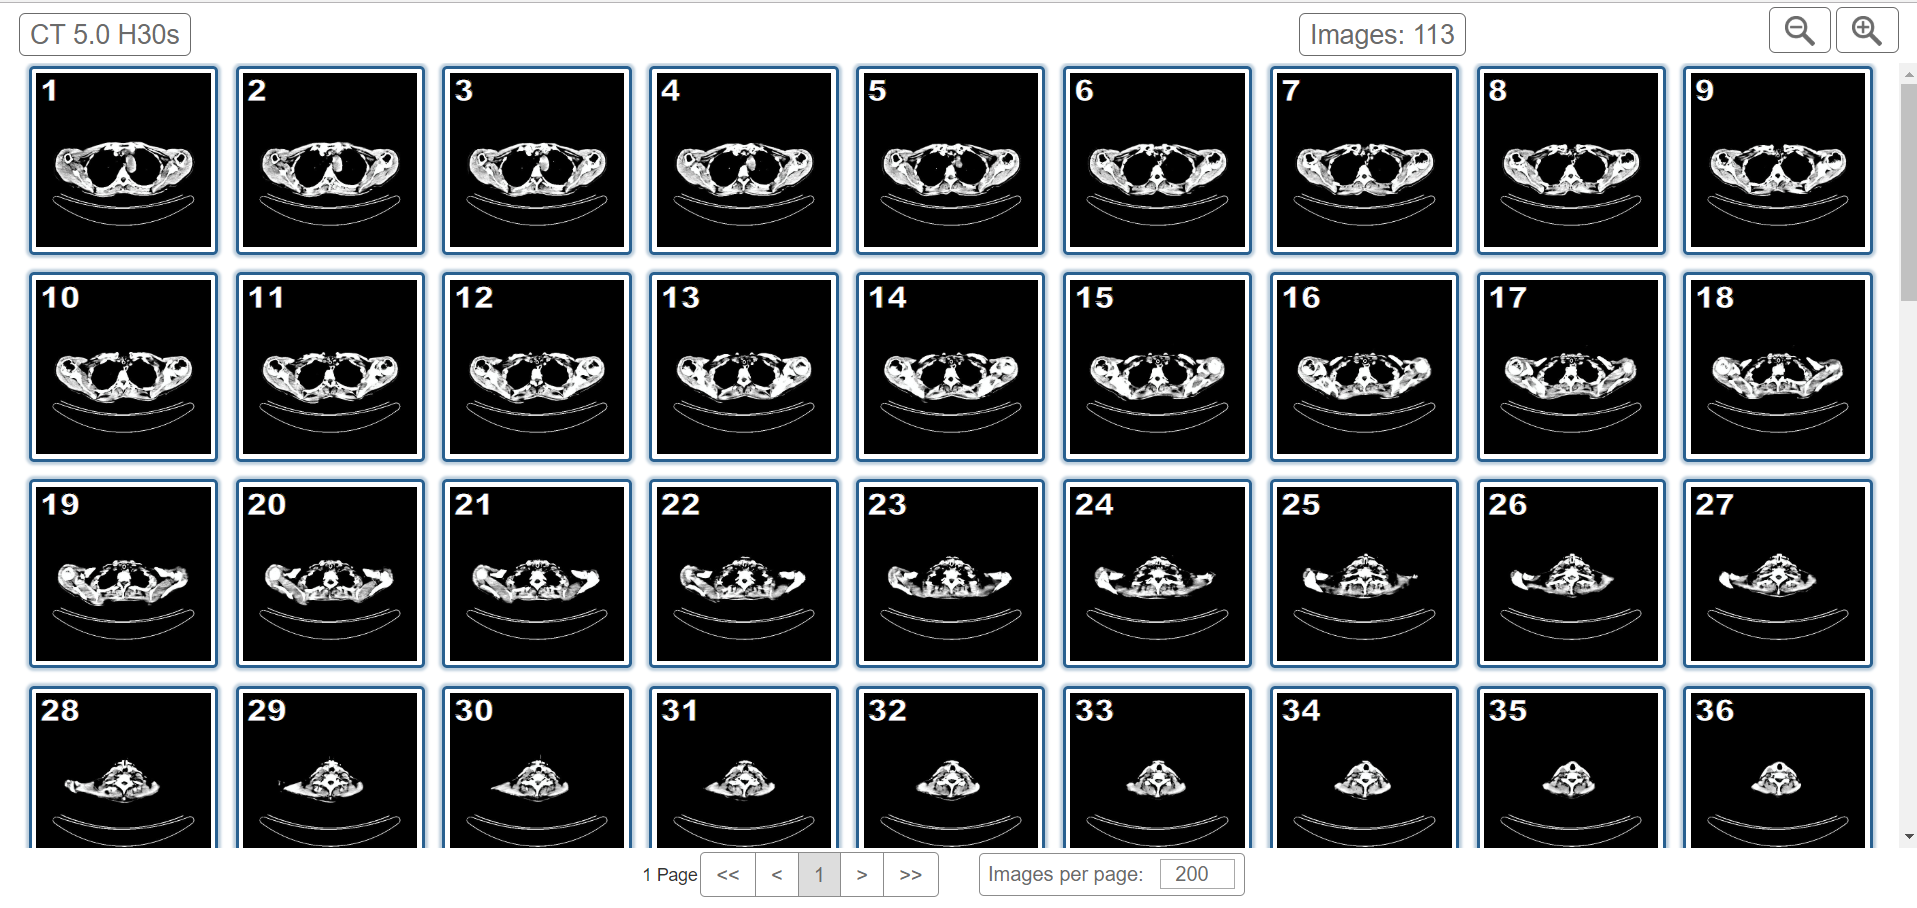 Thumbnails of all images in a selected image series